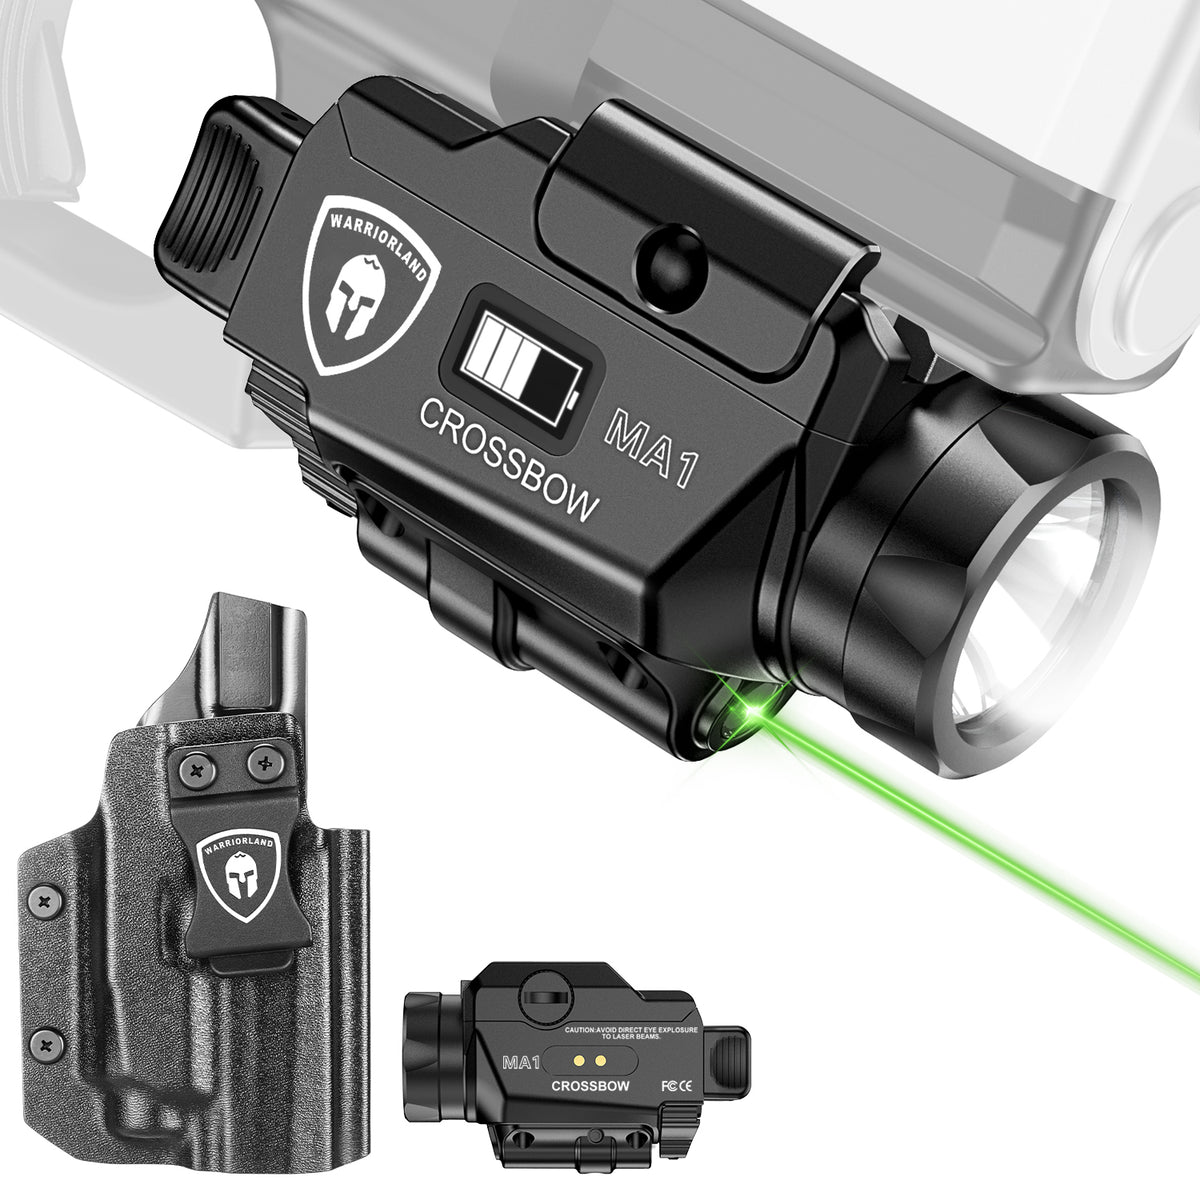 Universal Light Laser Combo with Taurus G2C/G3C Holster, Green Beam & LED Tactical Light, Magnetic USB Rechargeable Flashlight-Screen Displays Battery Status, Crossbow MA1 w/ G2C Holster